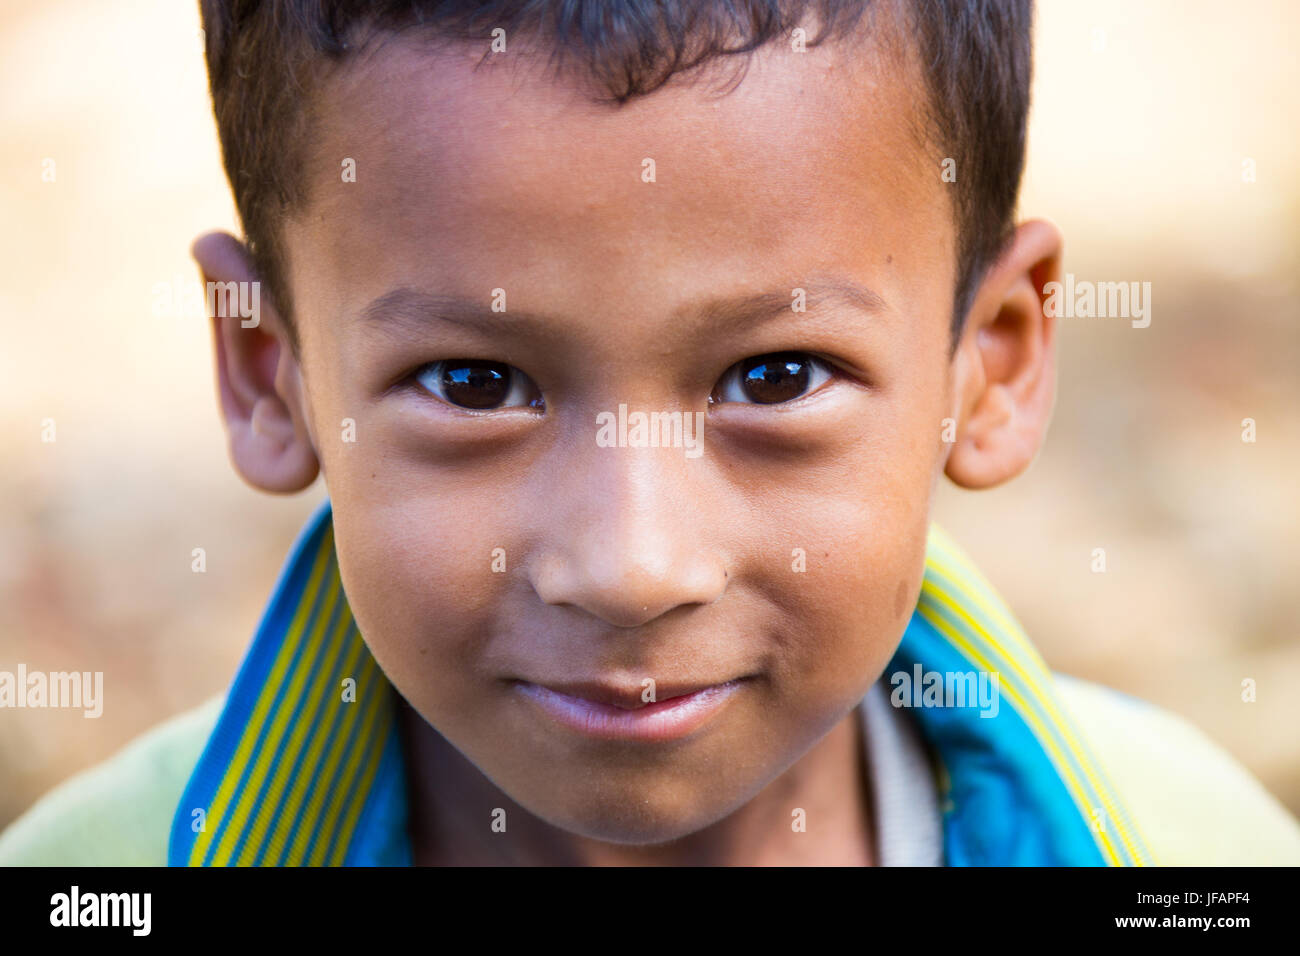 Boy in the Nuwakot district of Nepal Stock Photo